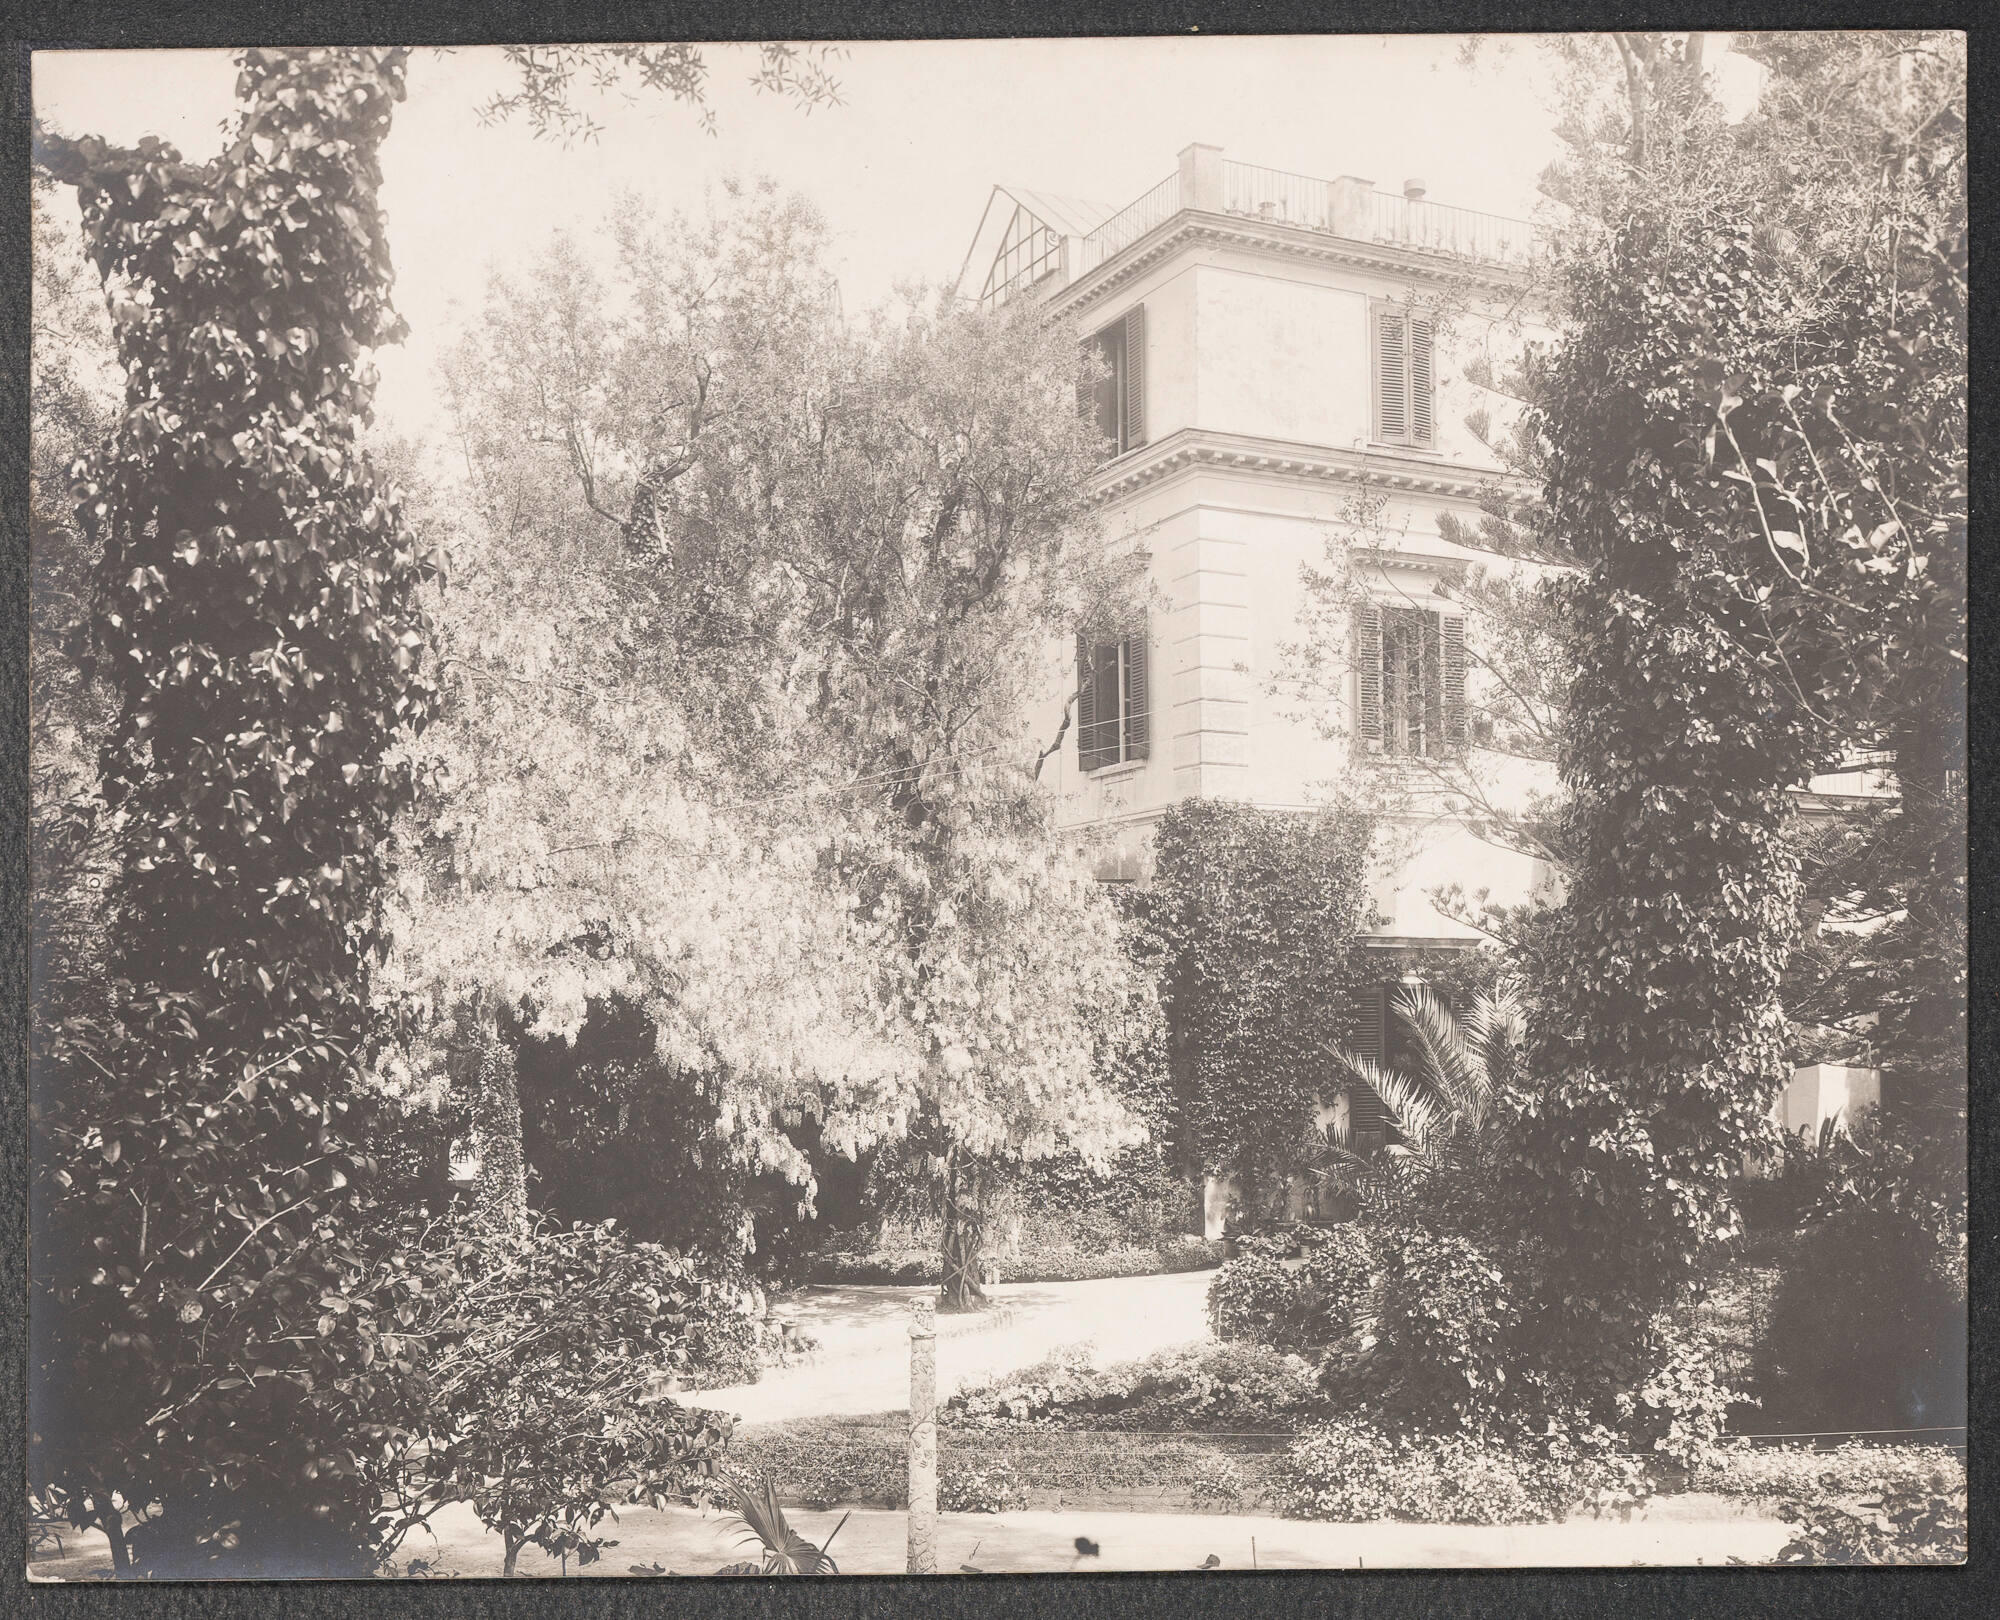 Black and white photograph of a three story white building in a lush Italian landscape.